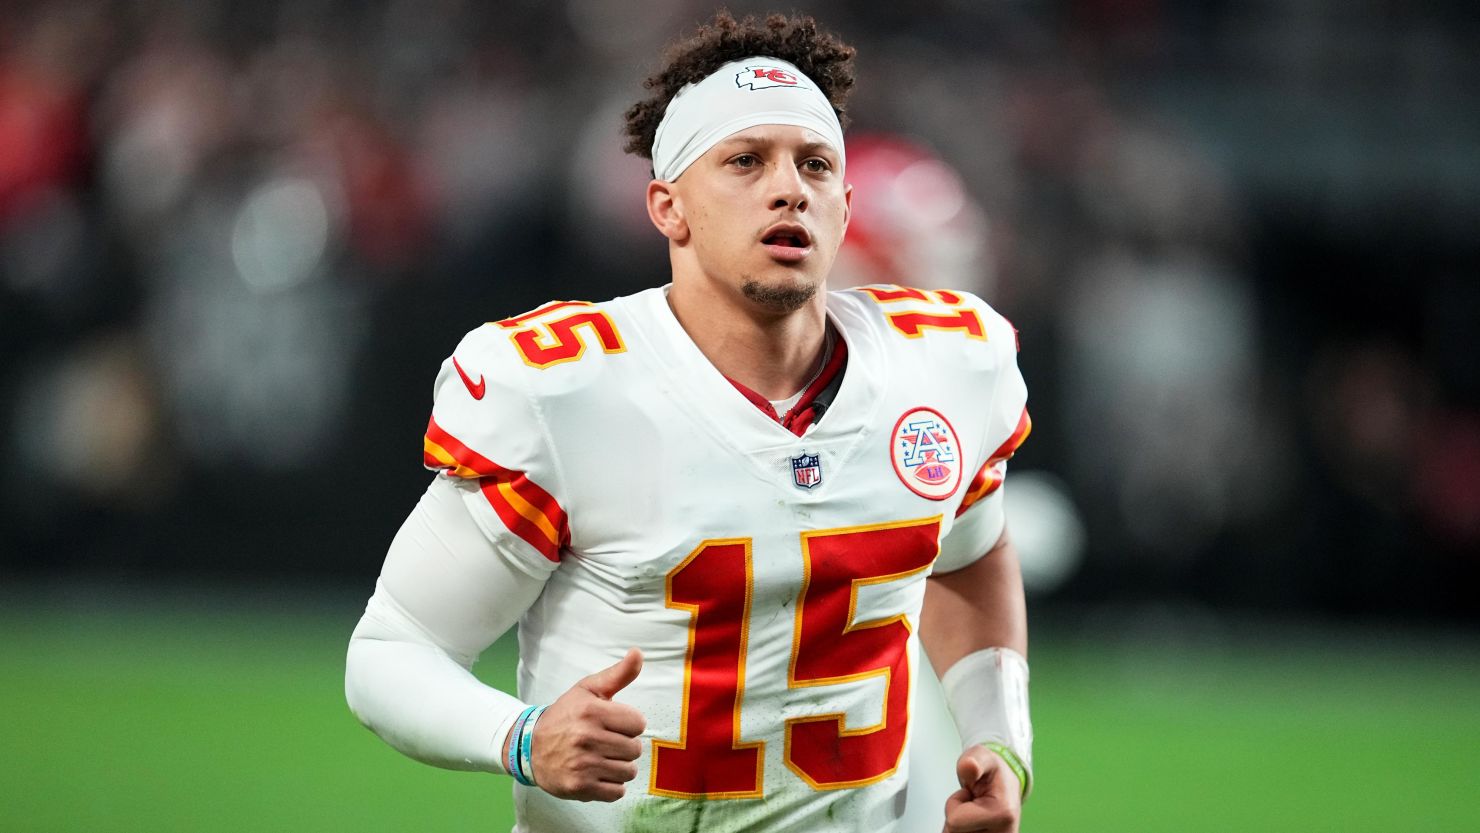 NFL star Patrick Mahomes joins NWSL team Kansas City Current's ownership  group | CNN